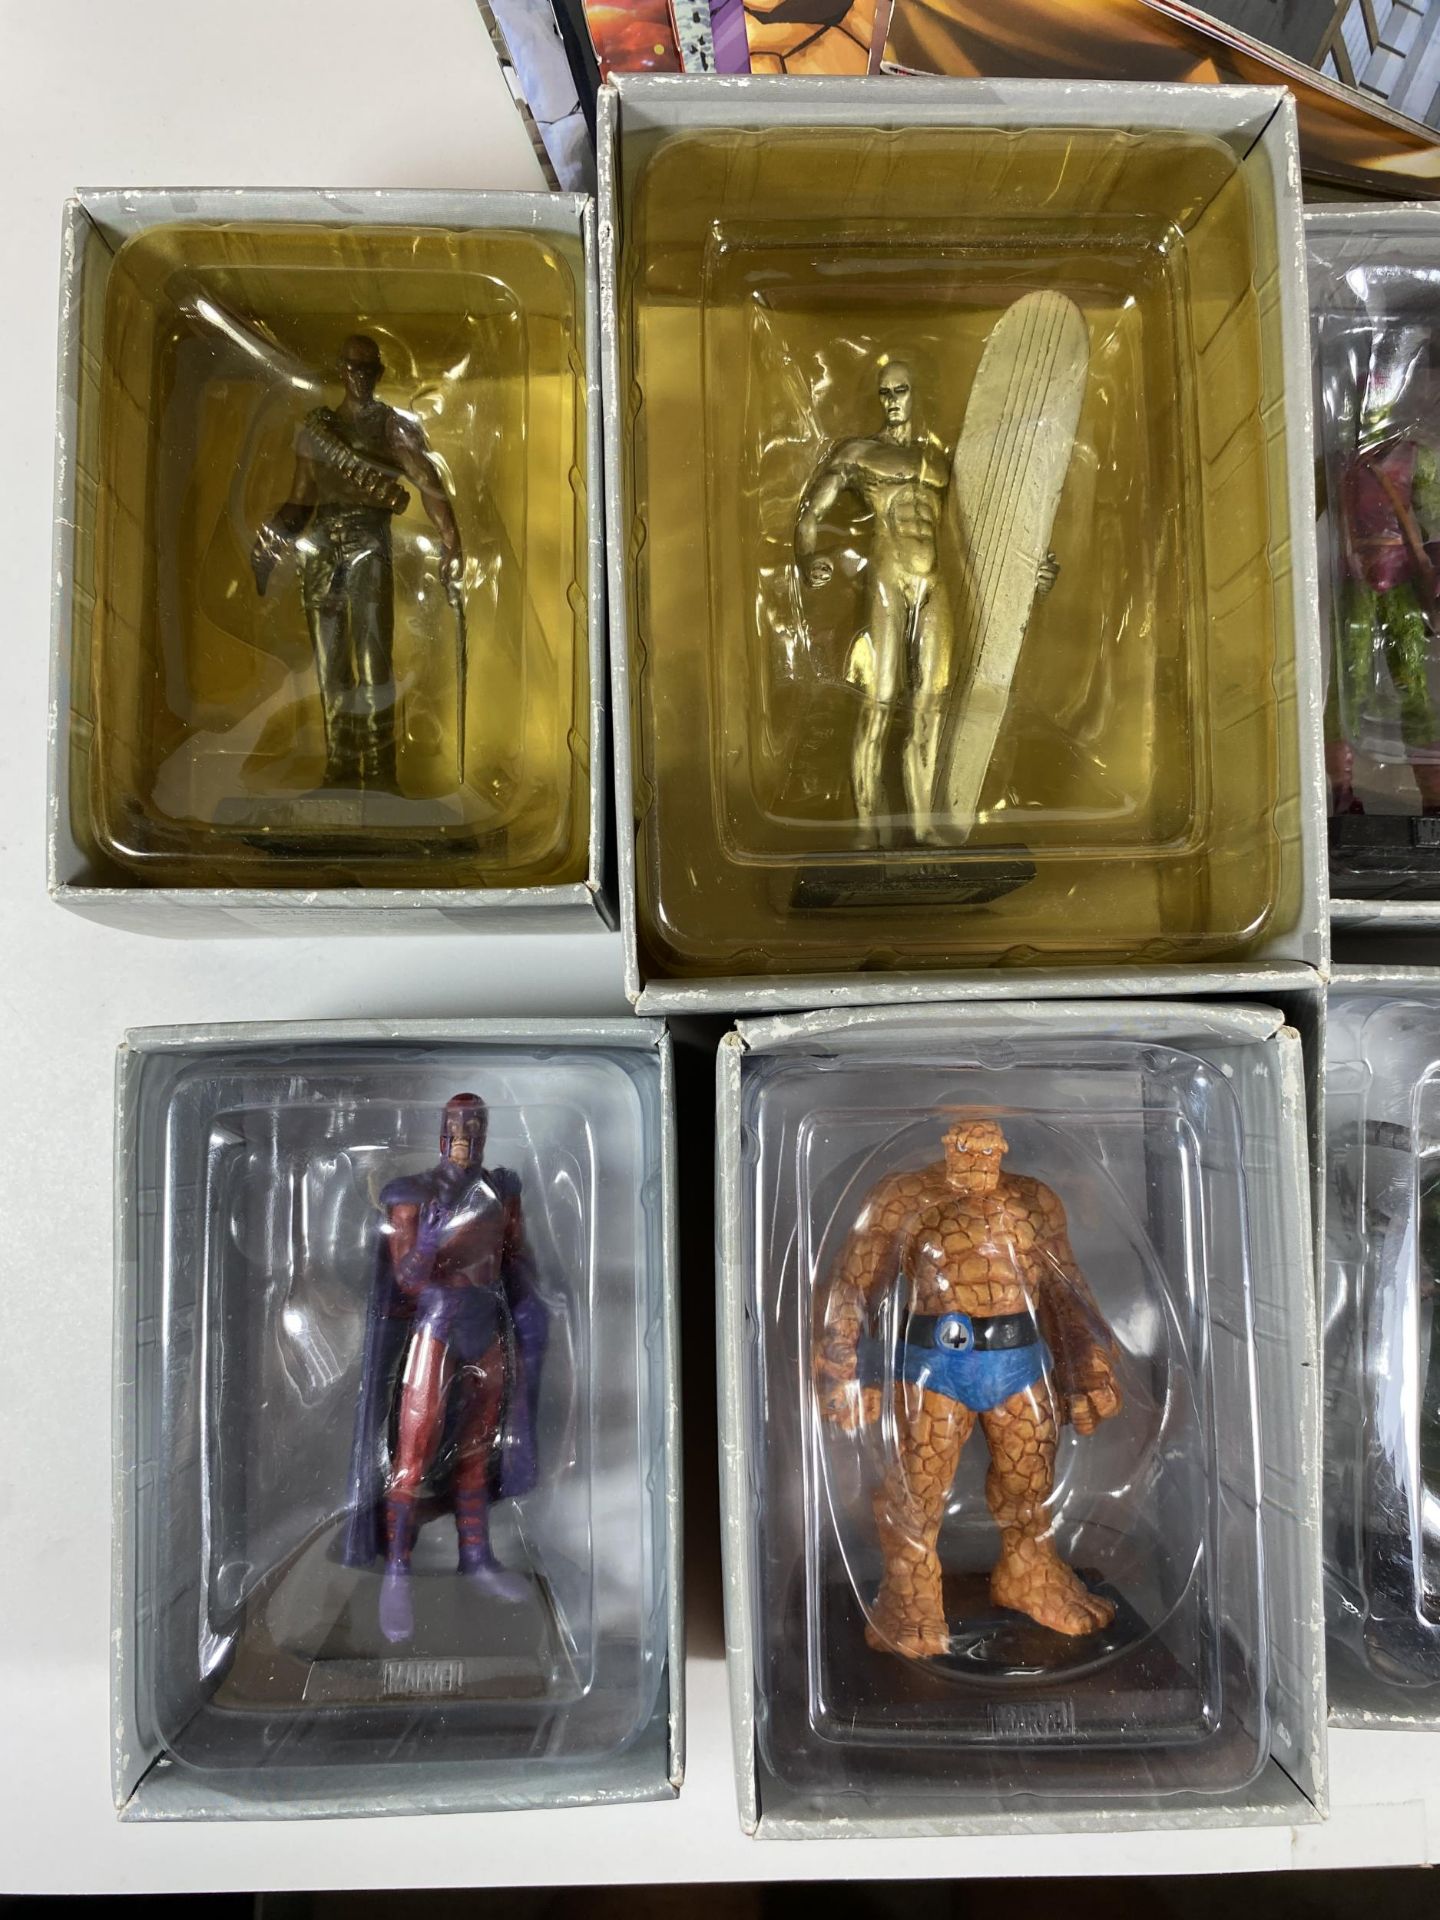 A LARGE MARVEL CLASSIC LEAD FIGURE COLLECTION BY EAGLEMOSS 1-49 FIGURE SET COMPLETE WITH - Image 3 of 9